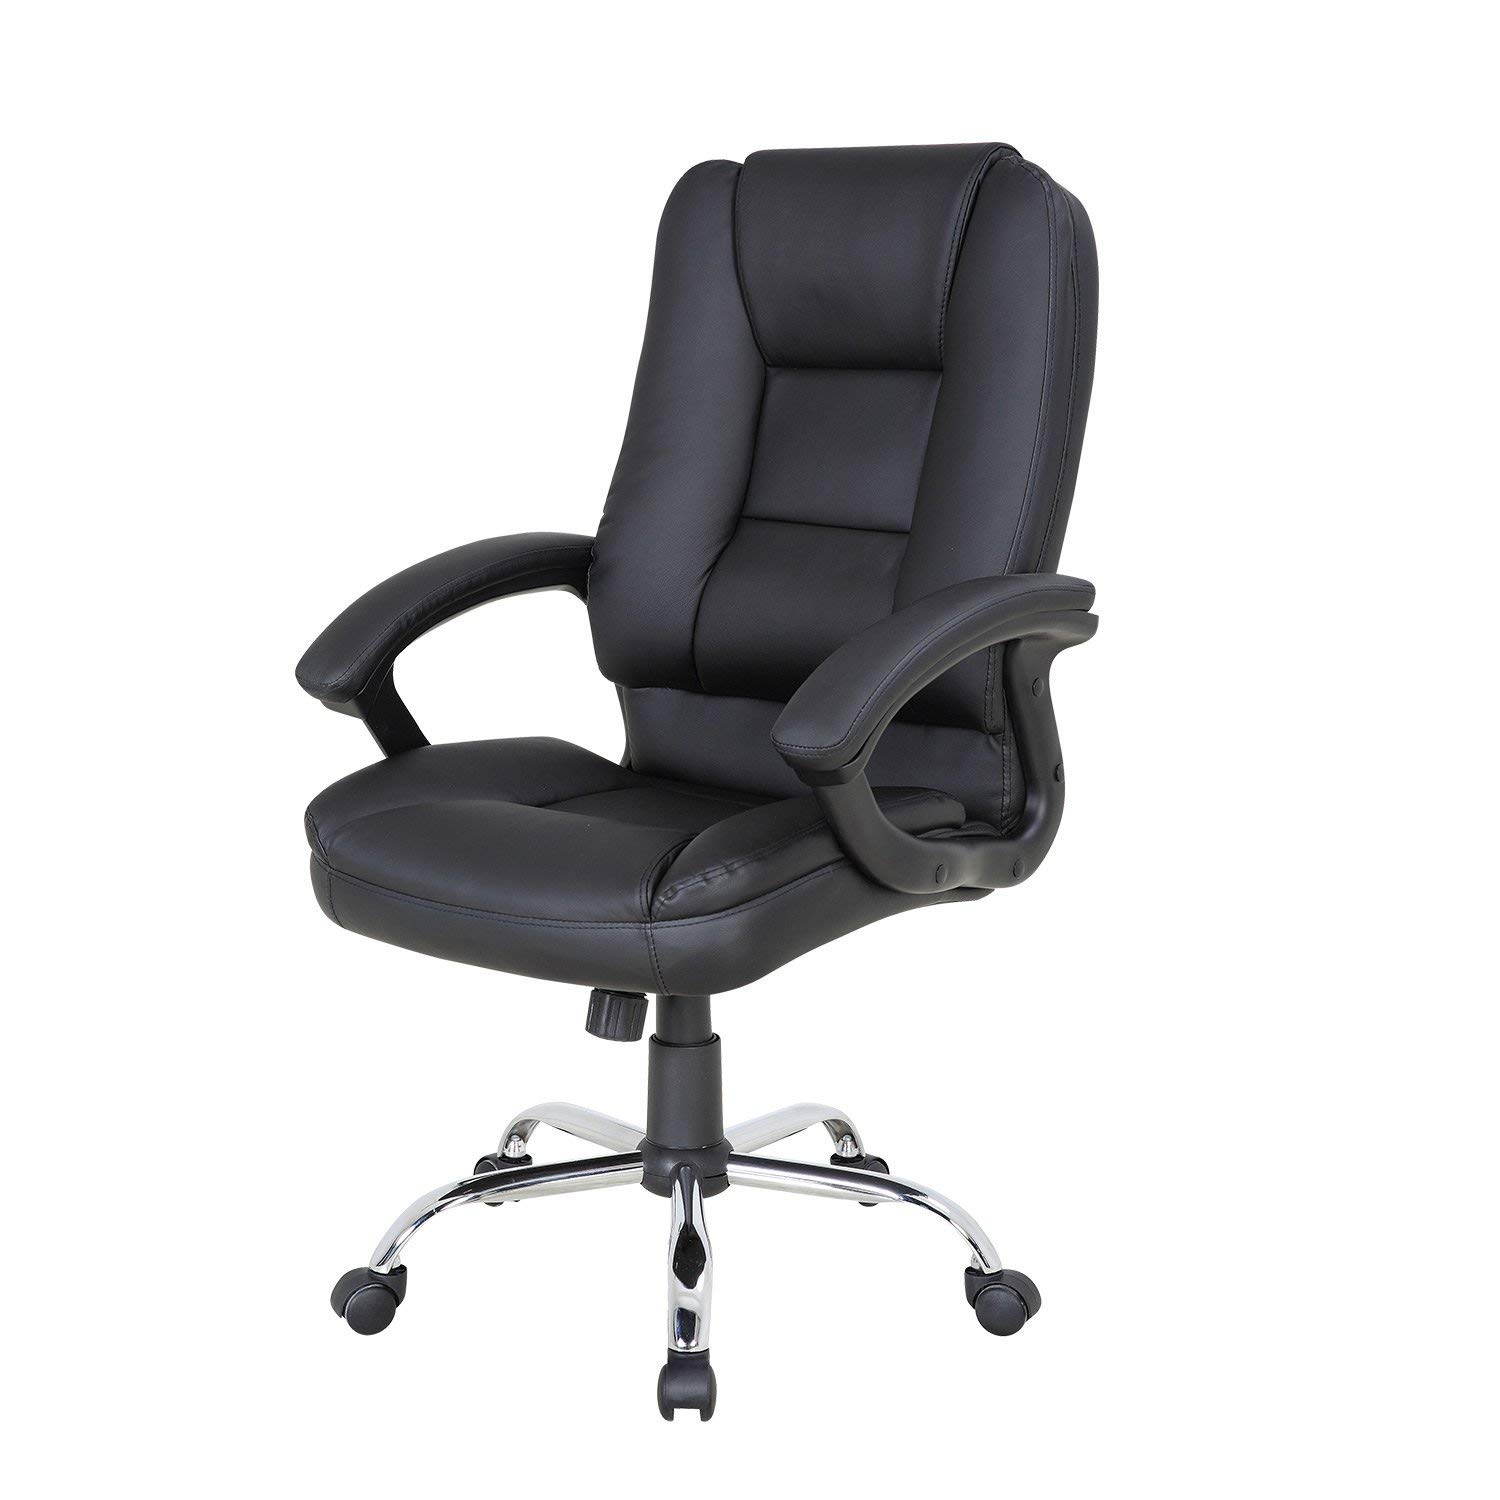 most comfortable office chair under $200 2018